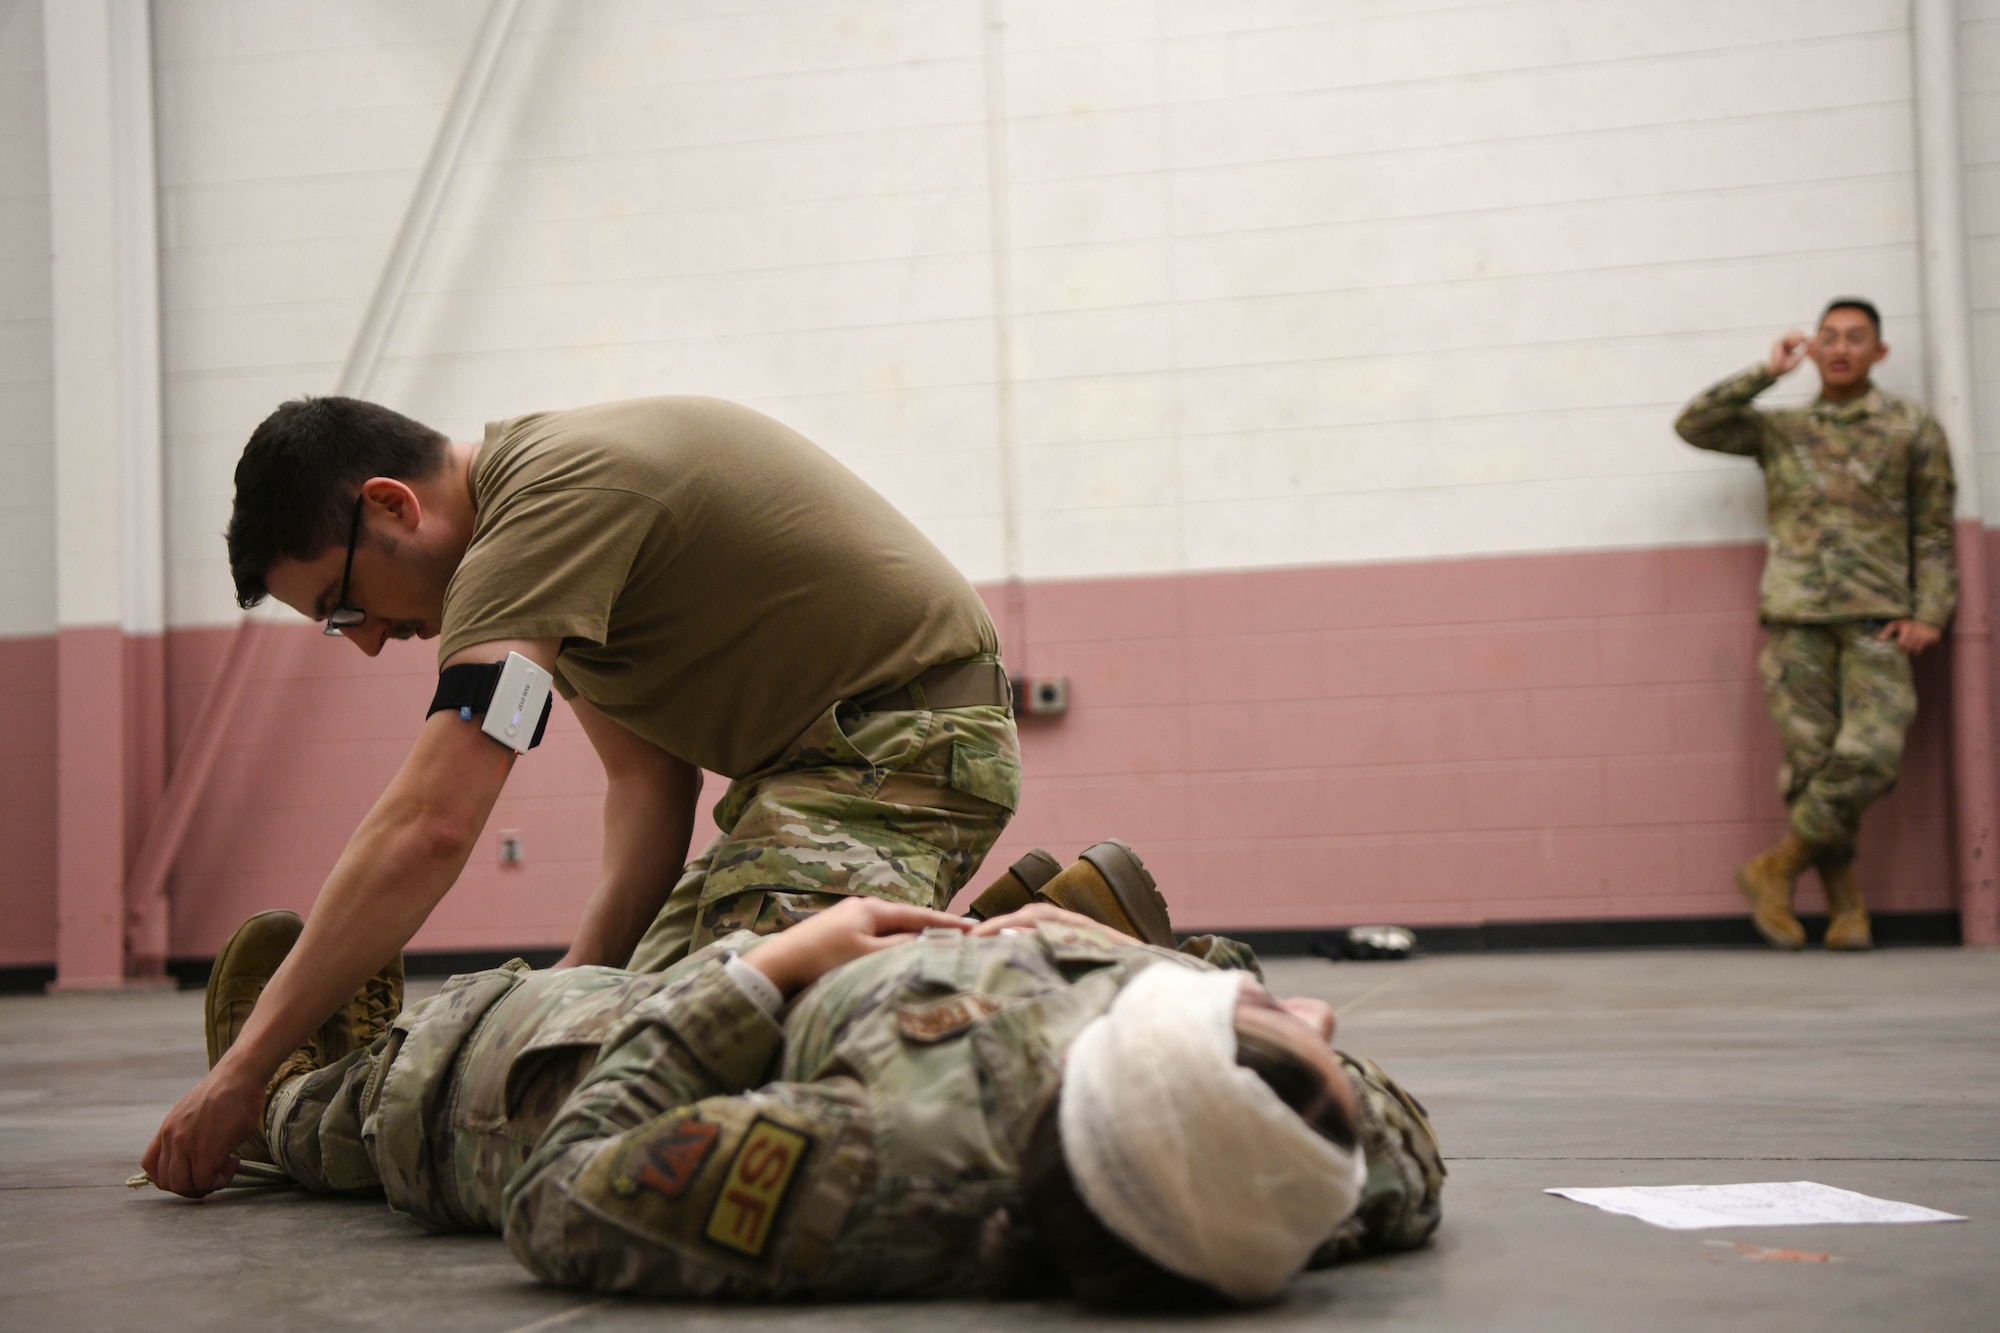 A man in a green shirt performs combat casualty care on a woman in a uniform.